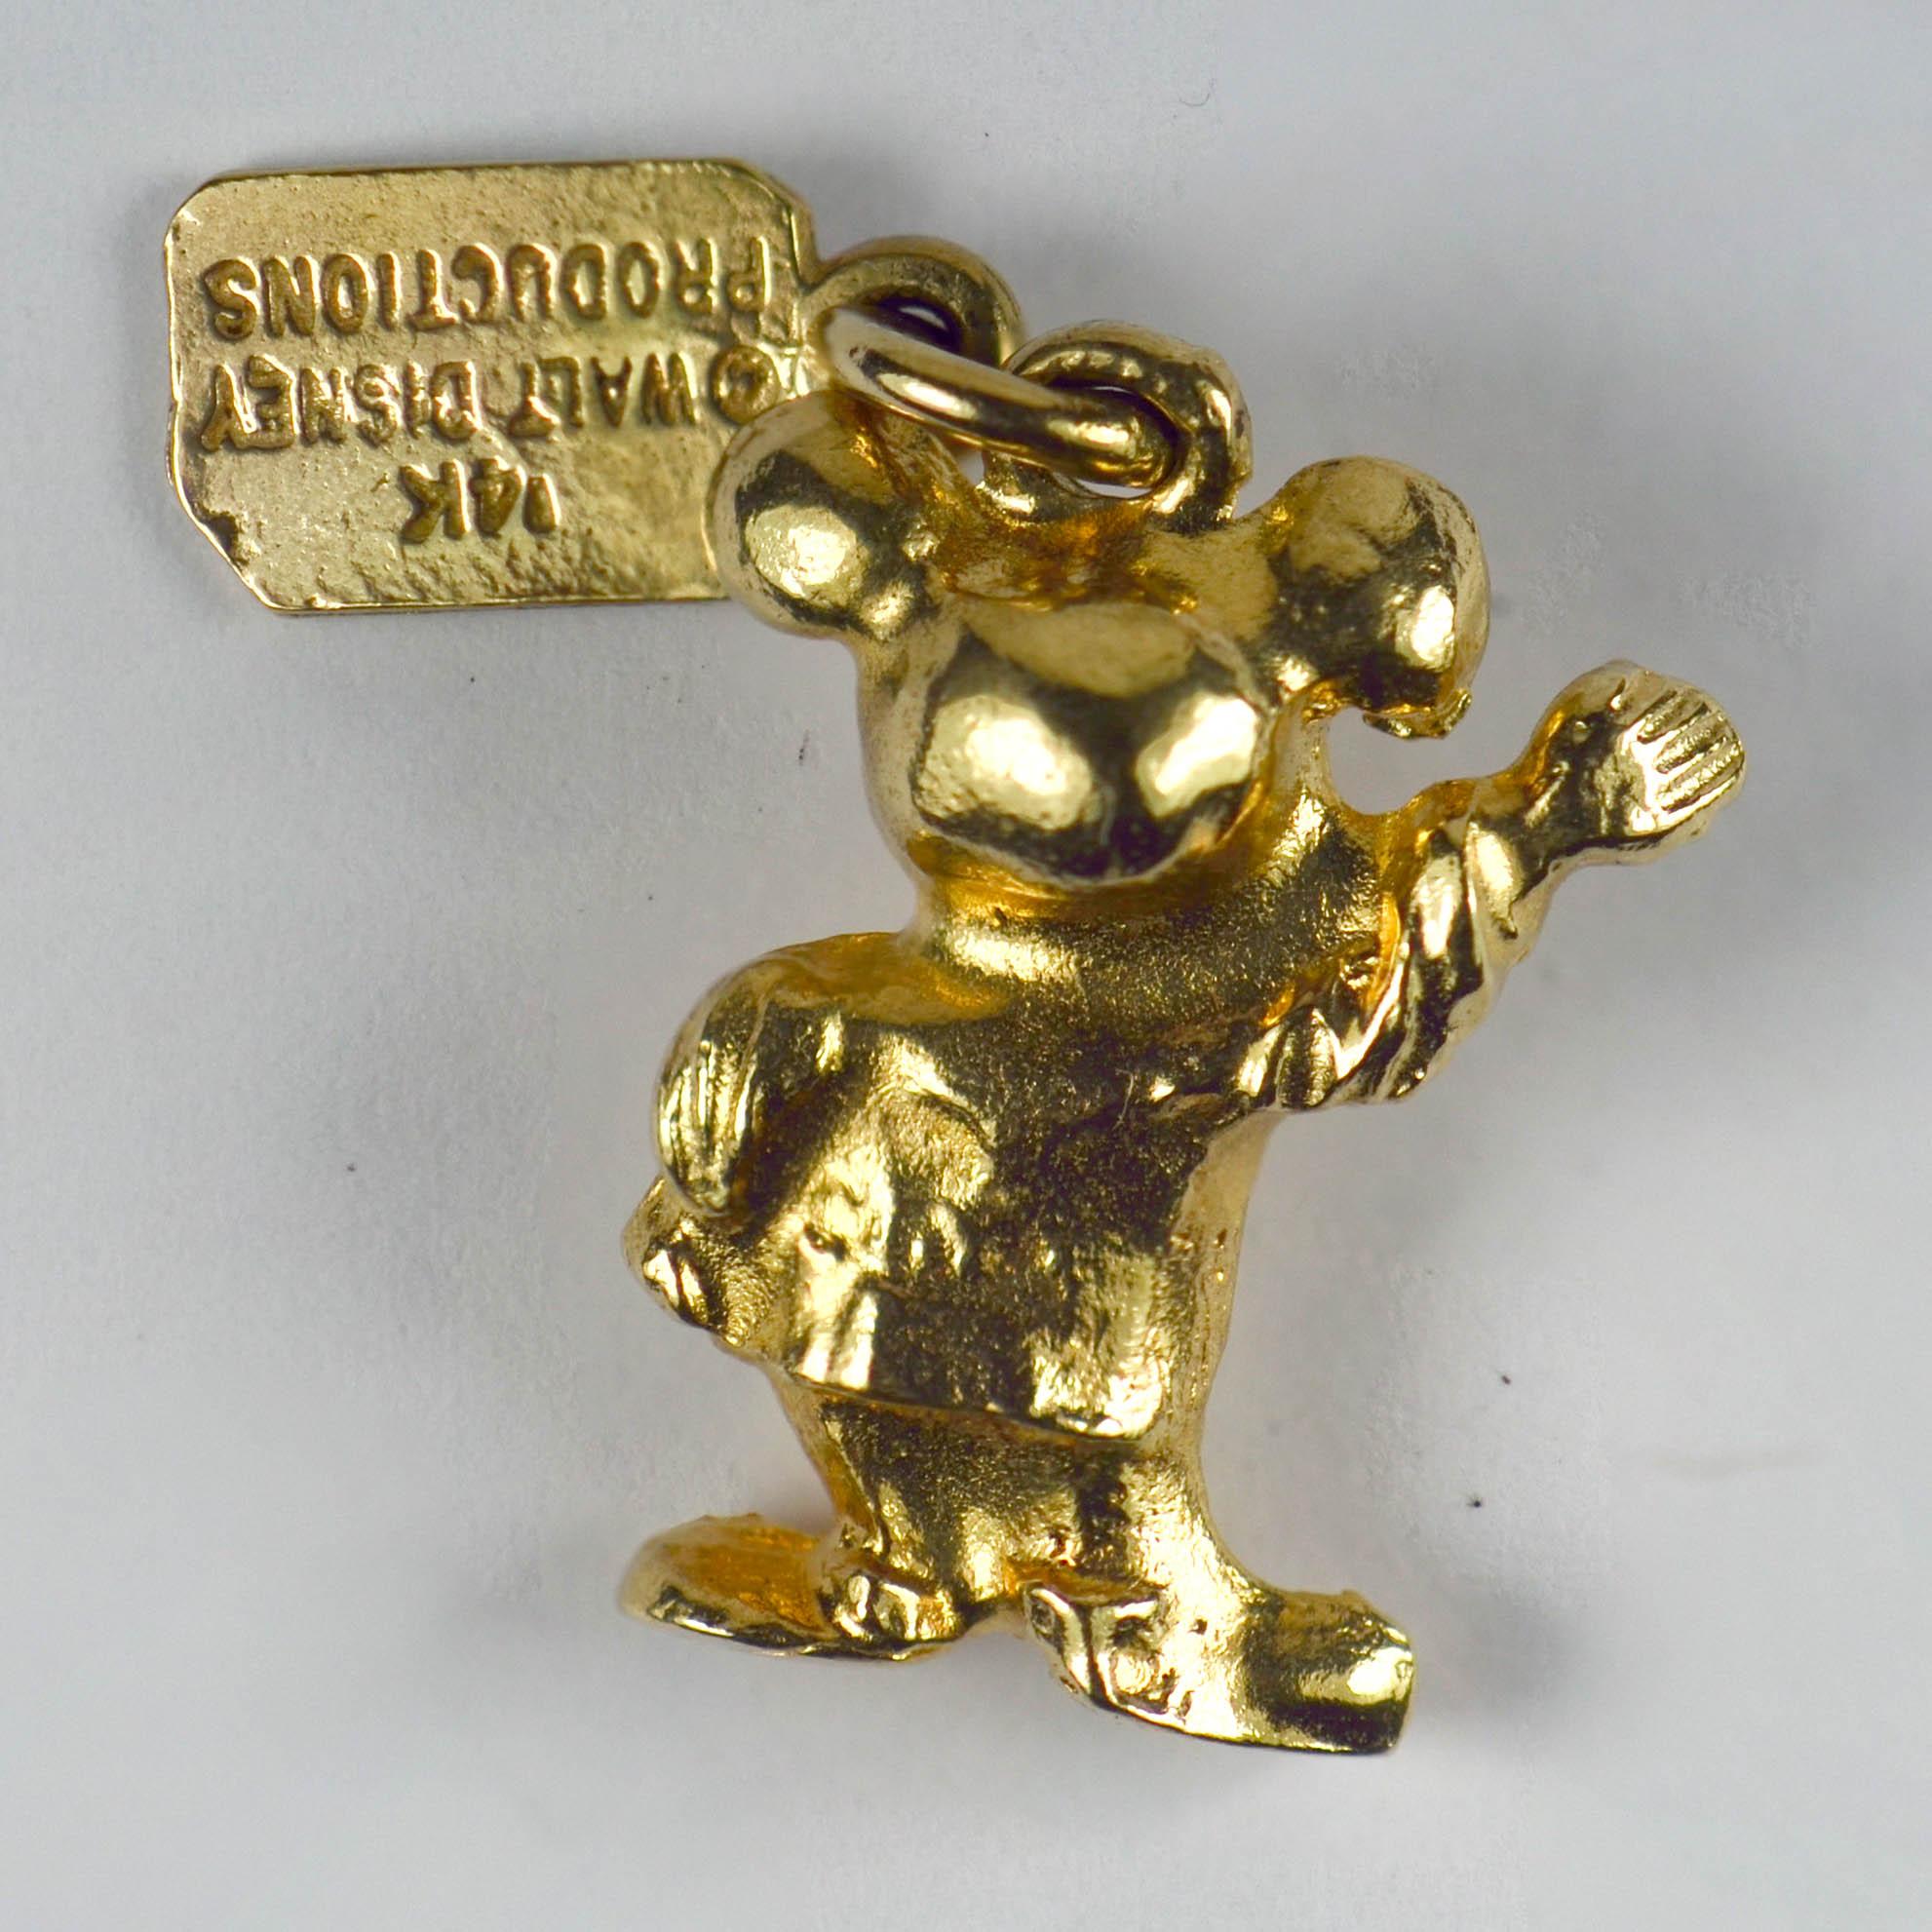 A 14 karat yellow gold charm pendant designed as Walt Disney's Mickey Mouse.
The tag attached to the charm features the DisneyWorld's logo along with the copyright for Walt Disney Productions.

Measurements: 2 x 1.5 x 0.8cm
Weight: 4.59 grams